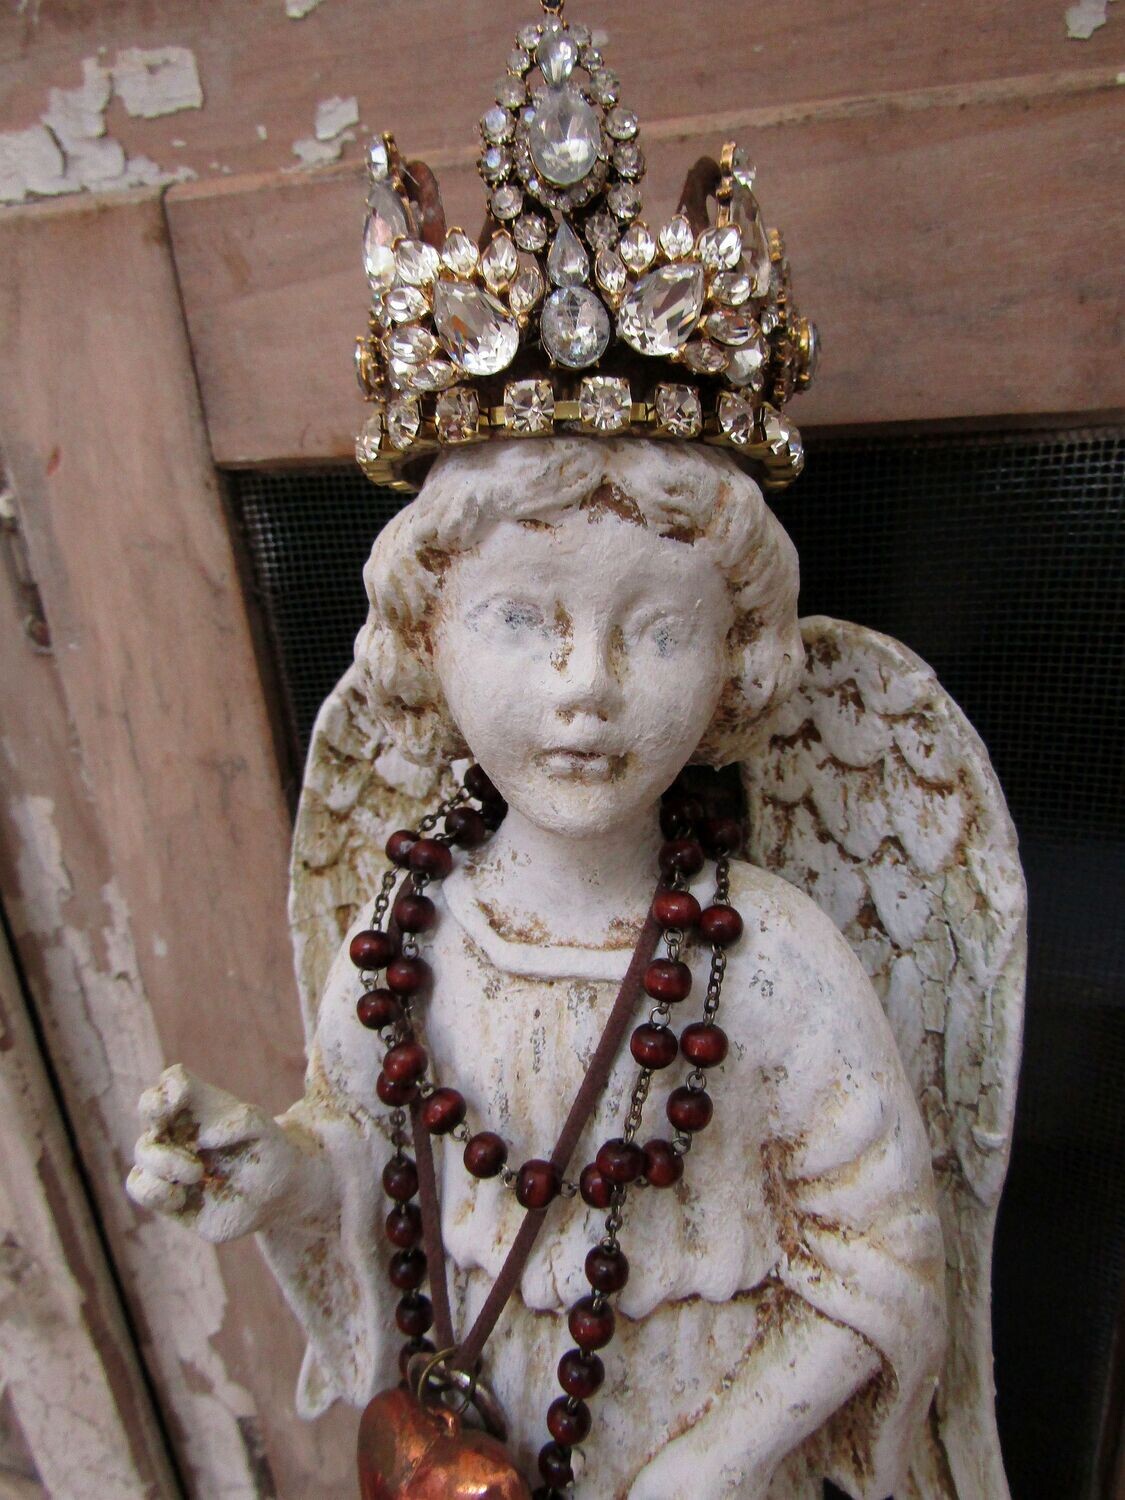 French Santos carved angel statue with rhinestone crown home decor